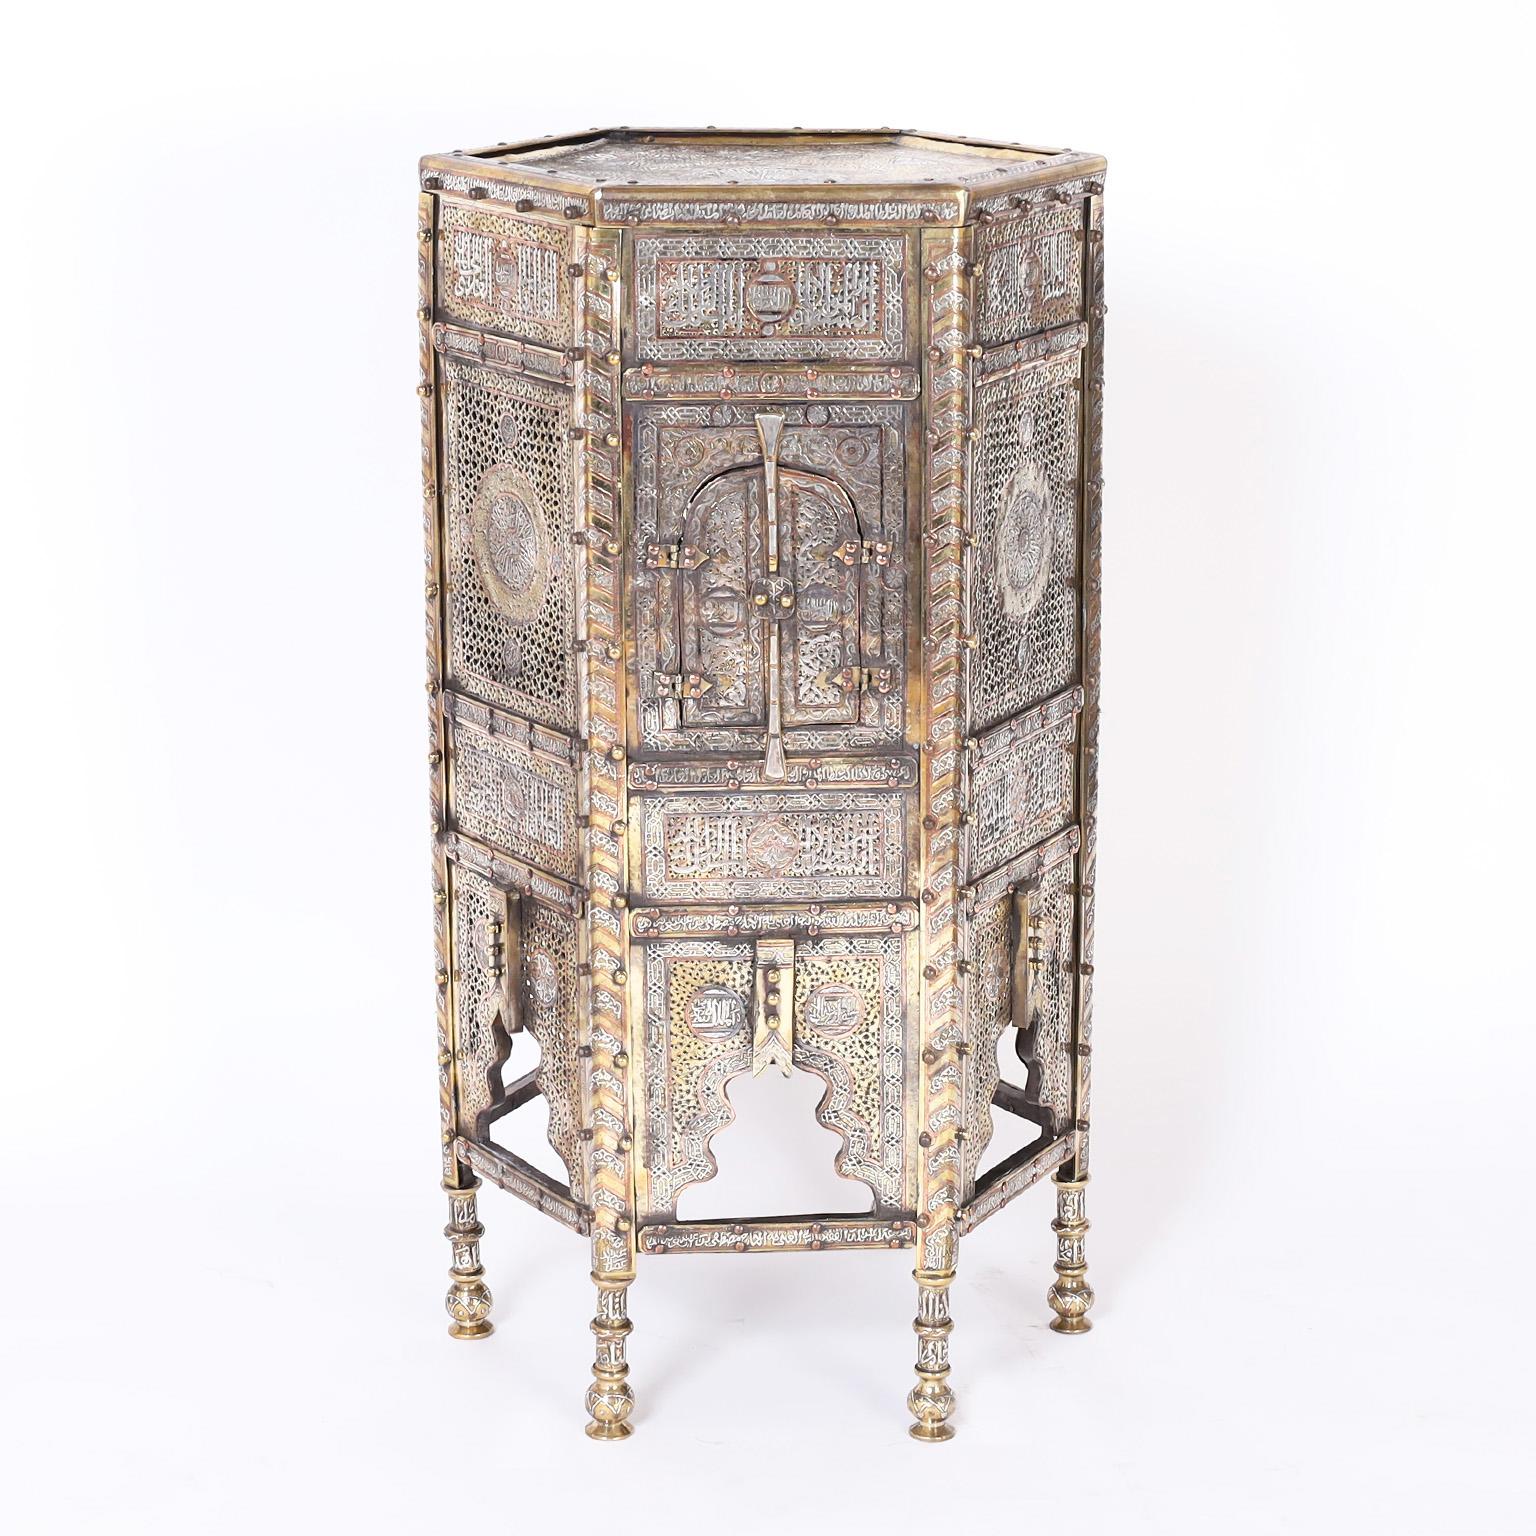 Pair of 19th century Moroccan stands crafted in brass and copper with silvered highlights over an elaborate hexagon form, composed with geometric designs, perforated panels with center medallions, moorish cabinet doors and arches on turned legs.